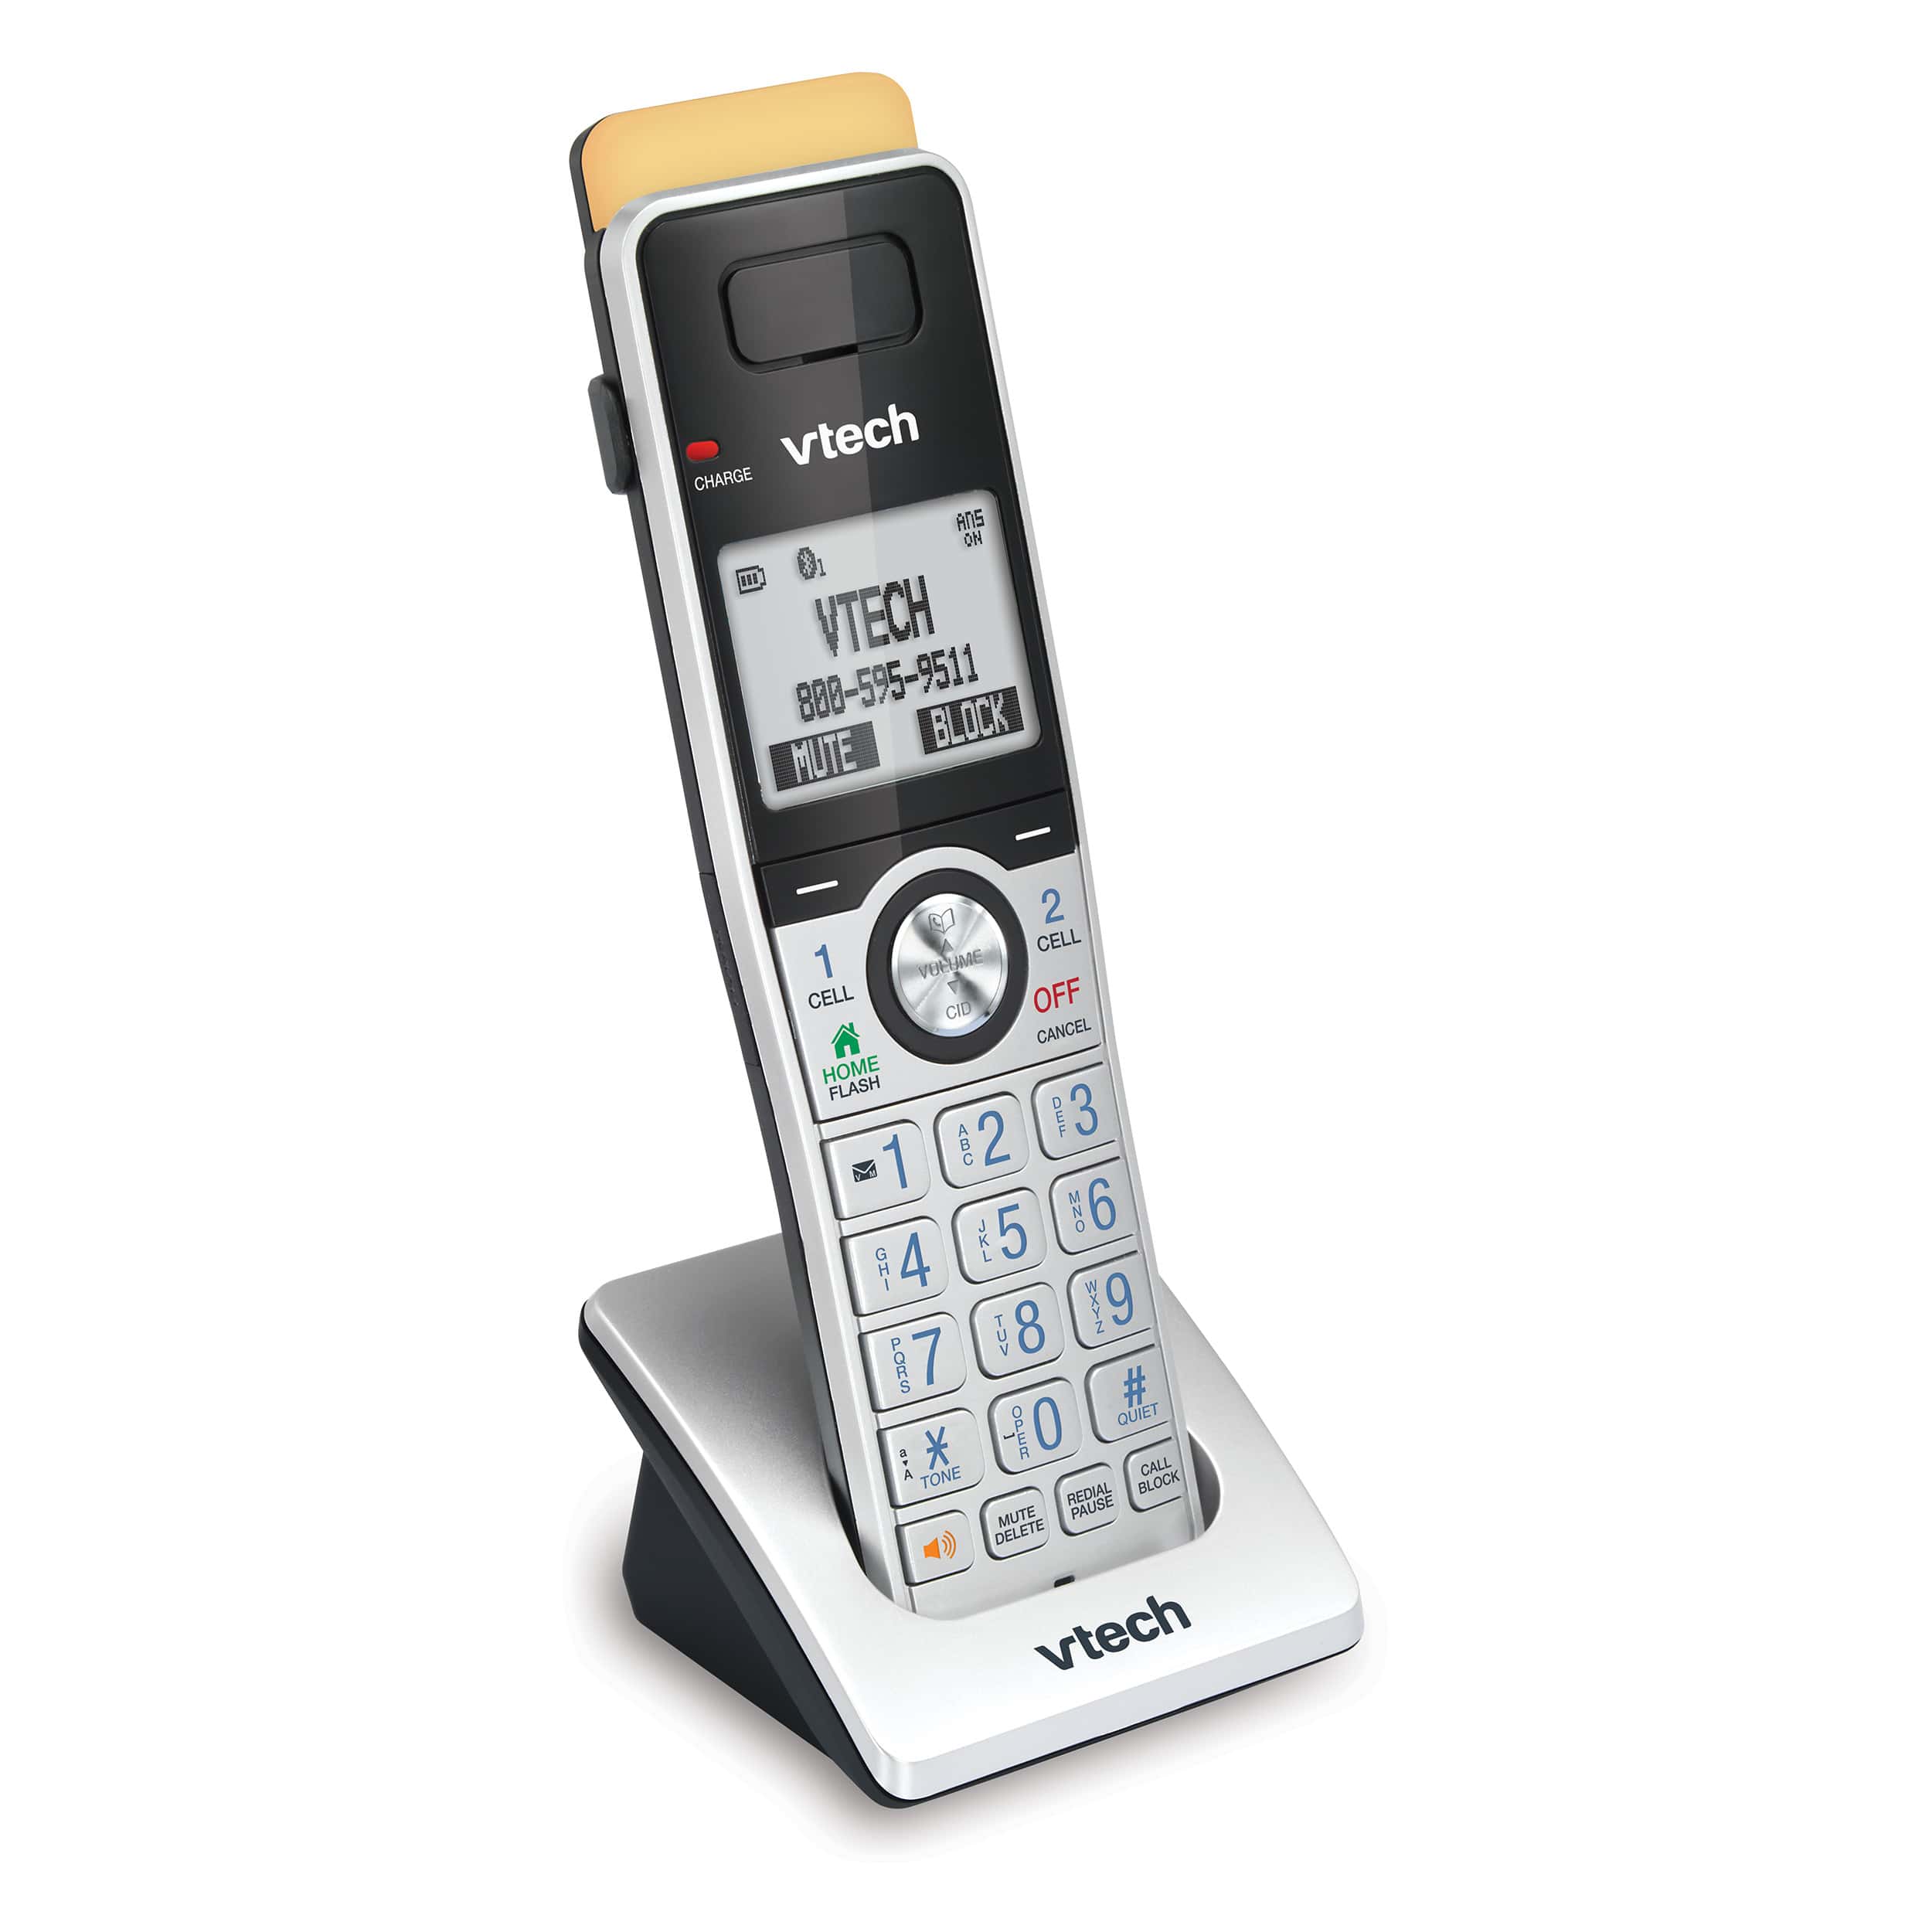 Accessory Handset with Super Long Range, Bluetooth Connect to Cell, and Smart Call Blocker - view 3